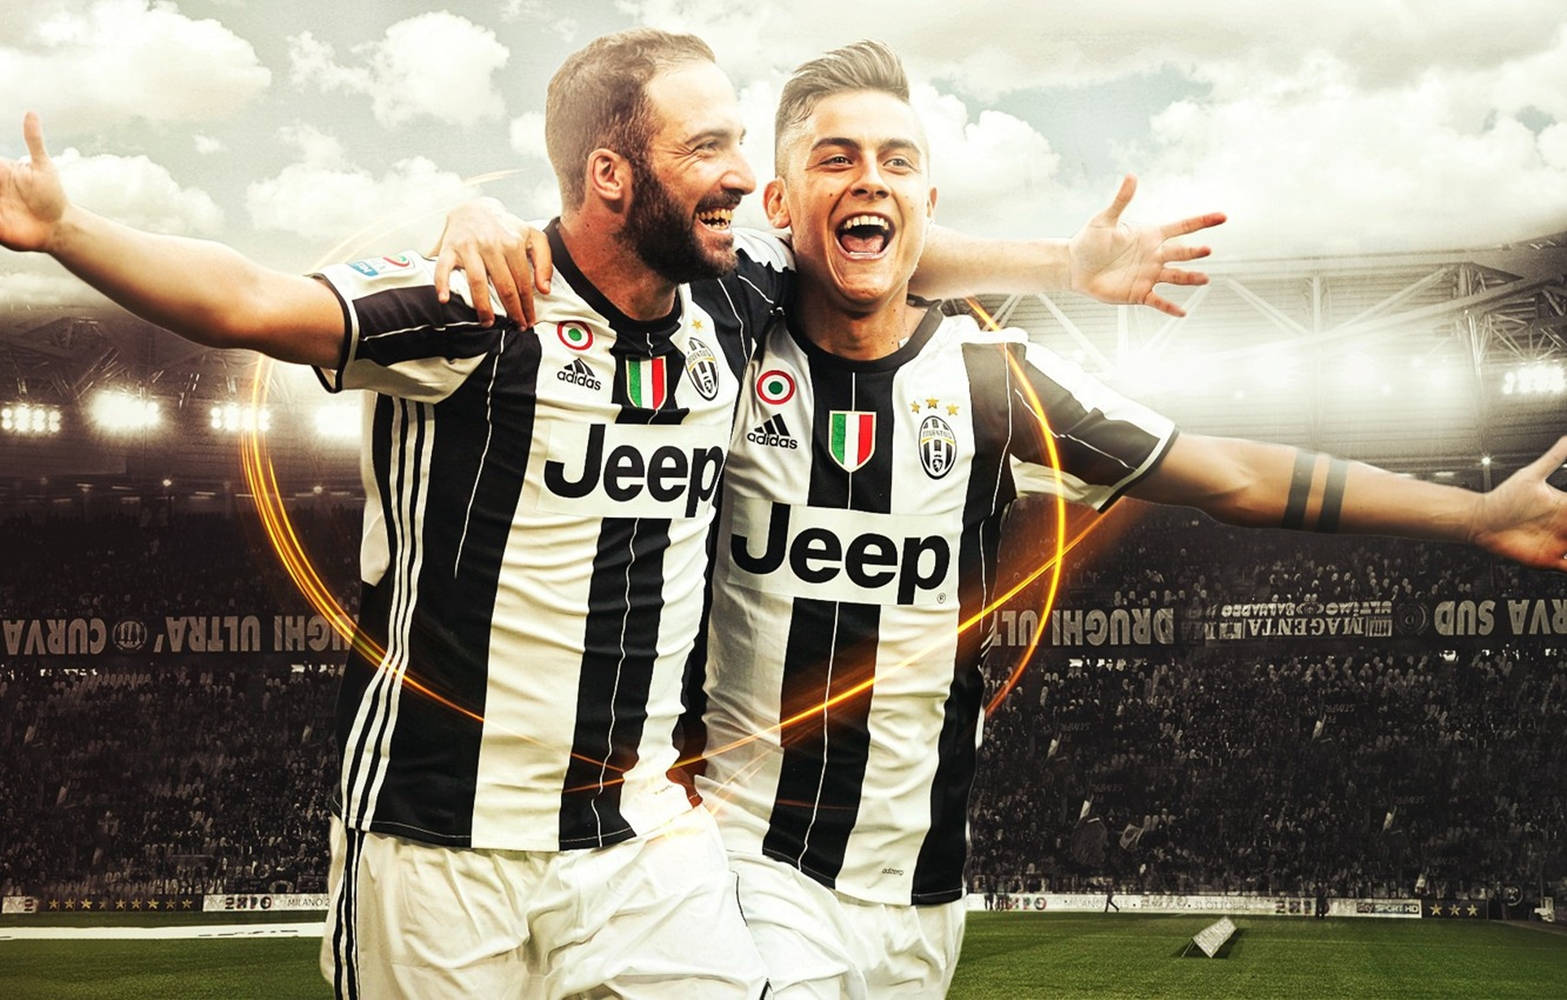 Capturing the Champions: Paulo Dybala and Gonzalo Higuain of Juventus Wallpaper